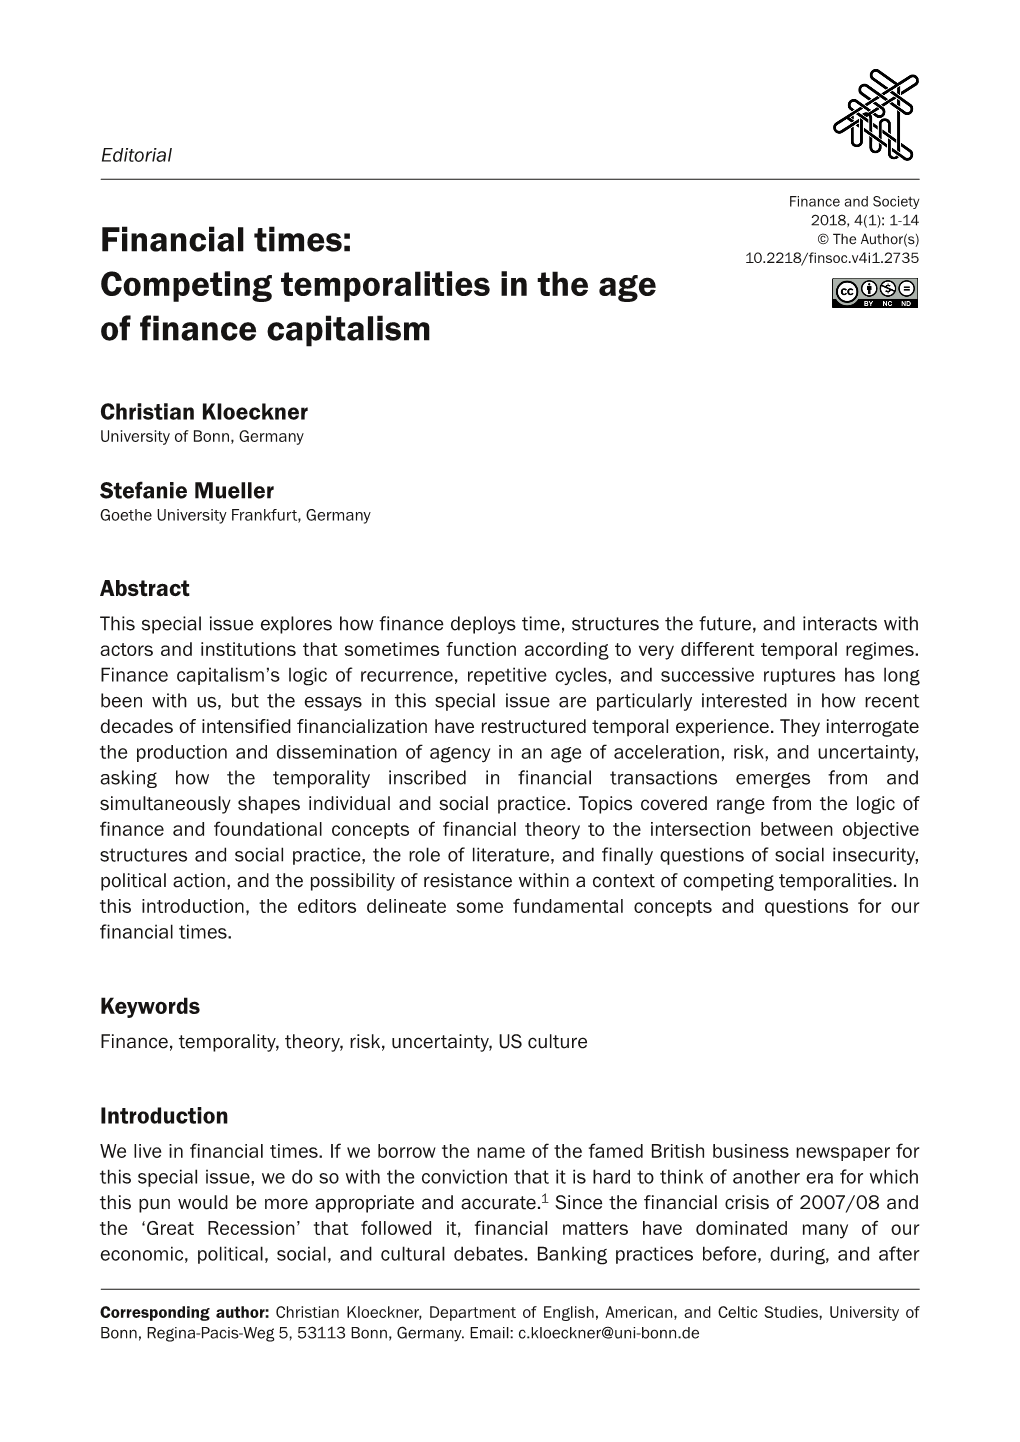 Competing Temporalities in the Age of Finance Capitalism